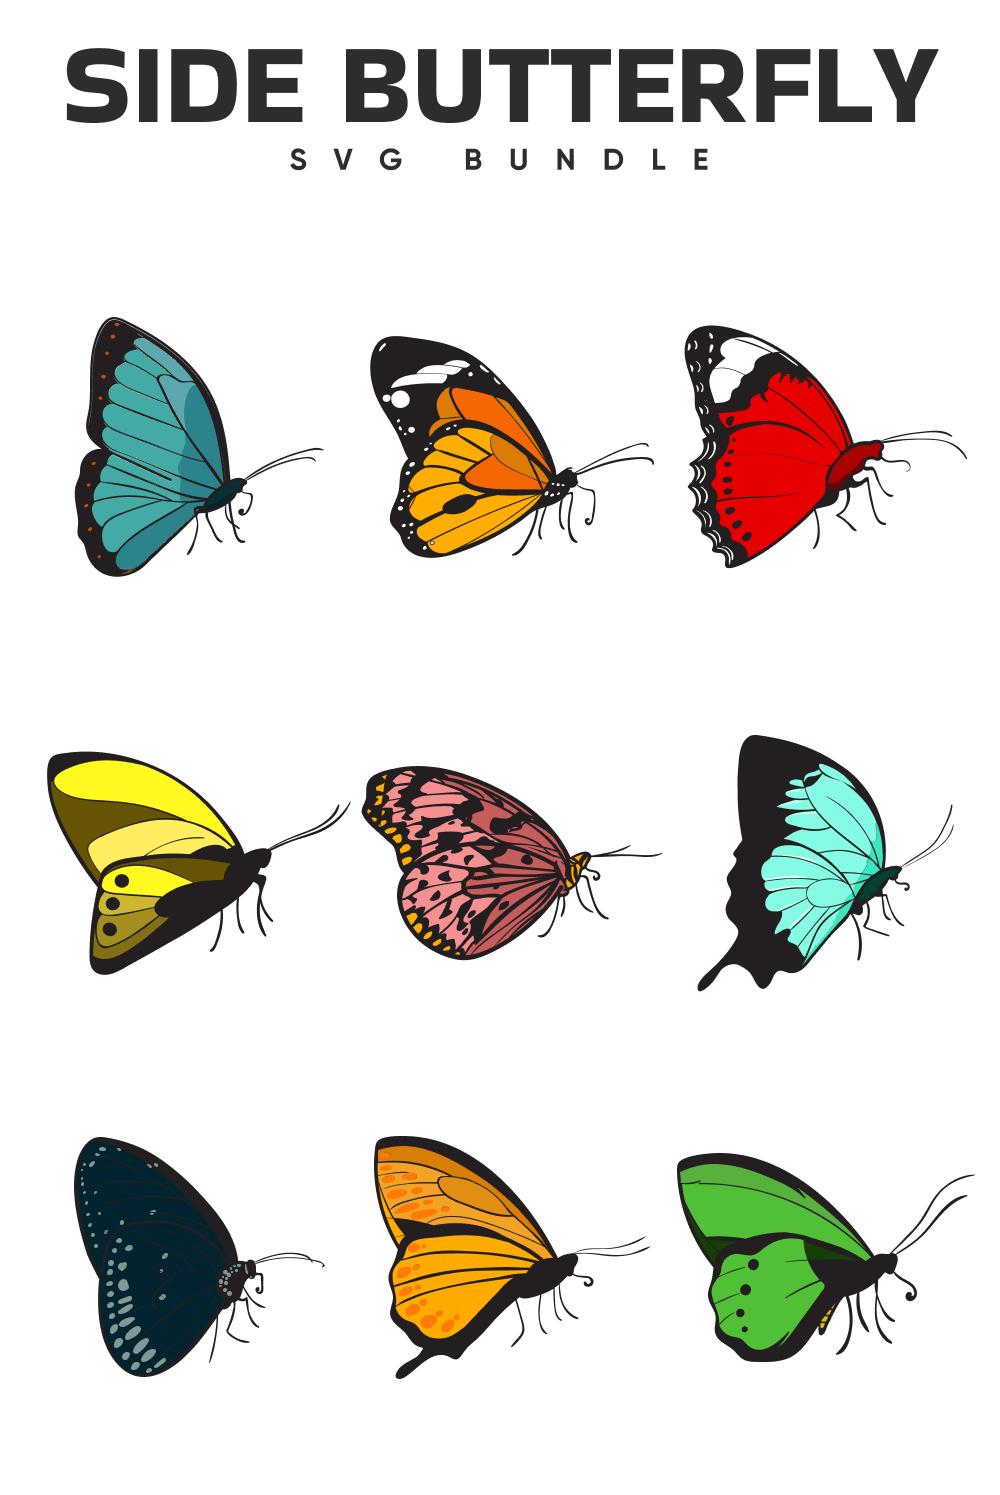 Group of colorful butterflies sitting on top of each other.